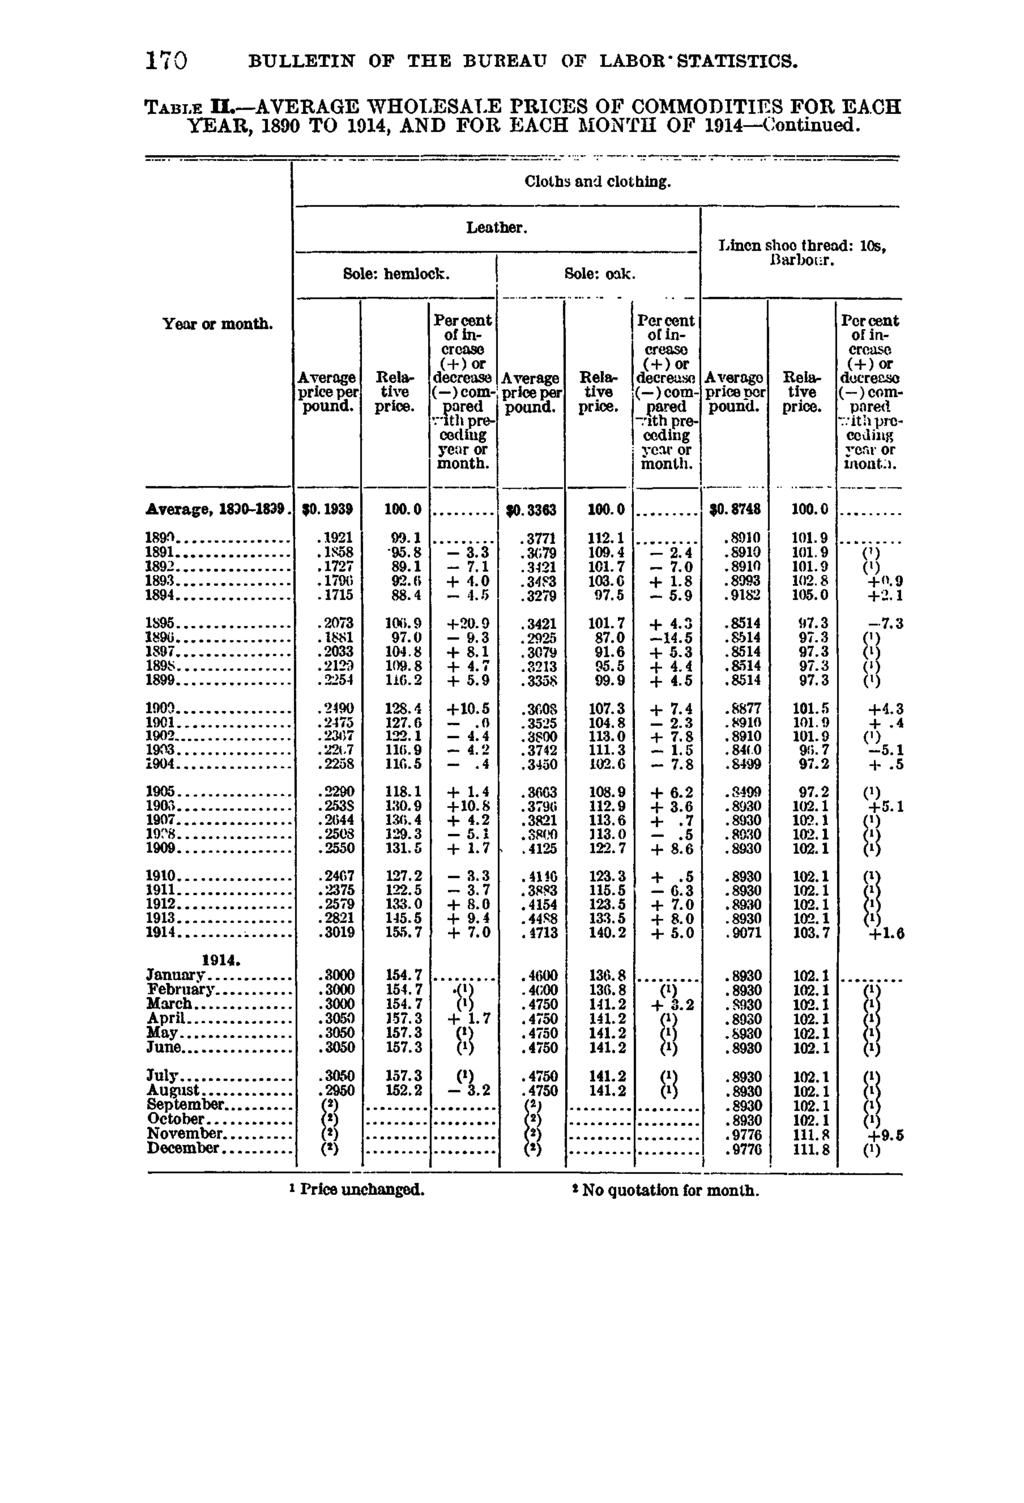 17 0 BULLETIN OP THE BUREAU OF LABOR * STATISTICS. T a b l e IL AVERAGE WHOLESALE PRICES OF COMMODITIES FOR EACH YEAR, 1890 TO 1914, AND FOR EACH MONTH OF 1914 Continued.